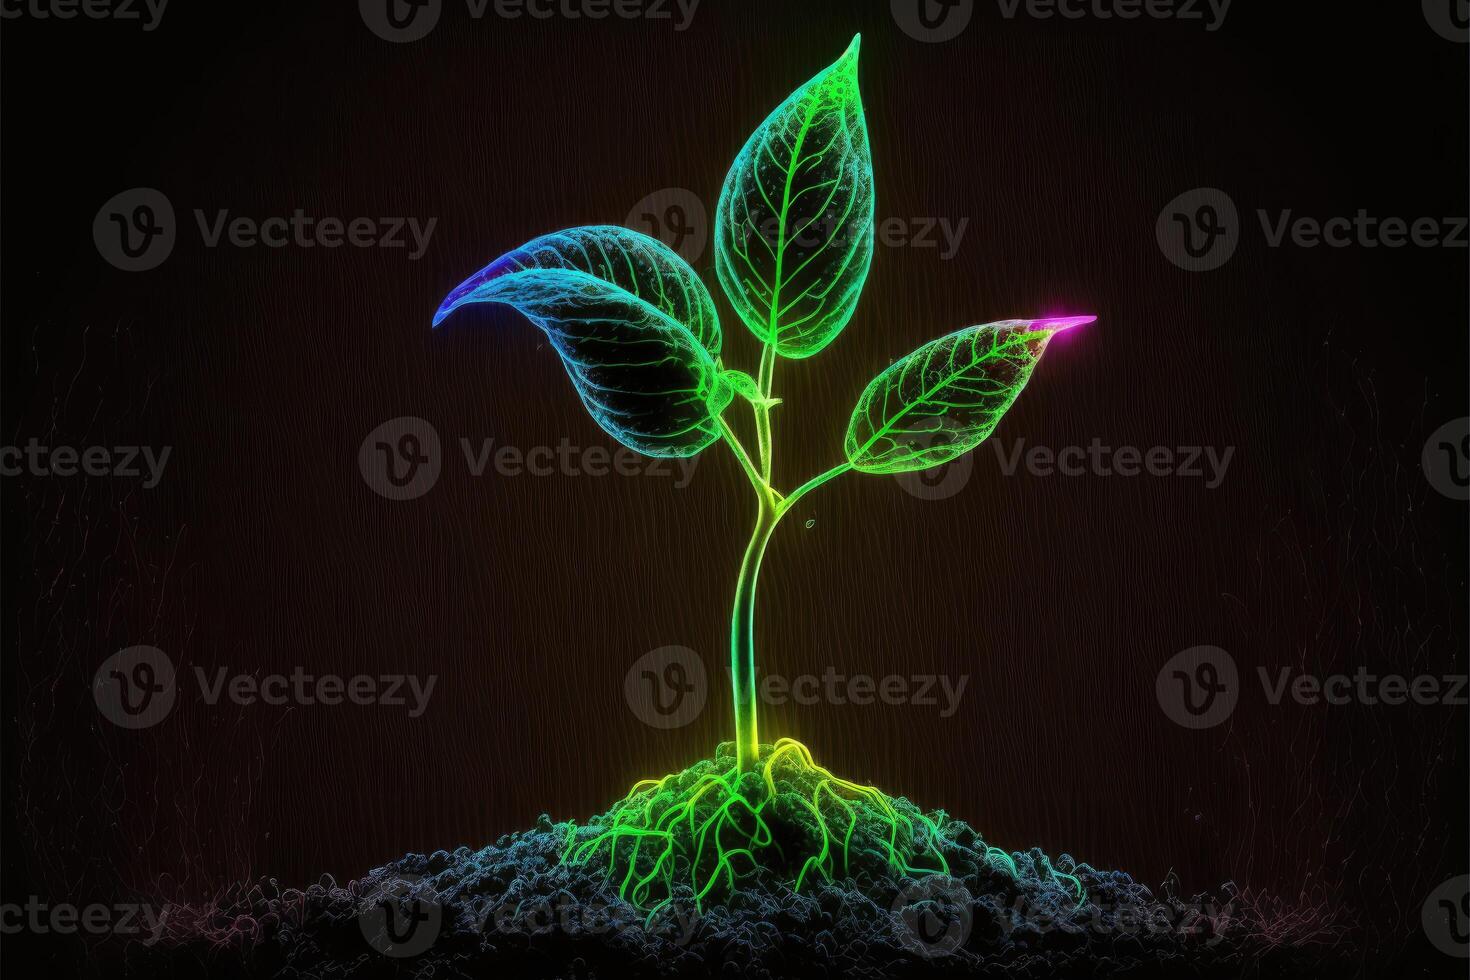 A young seedling just starting to sprout glow in the dark background. photo